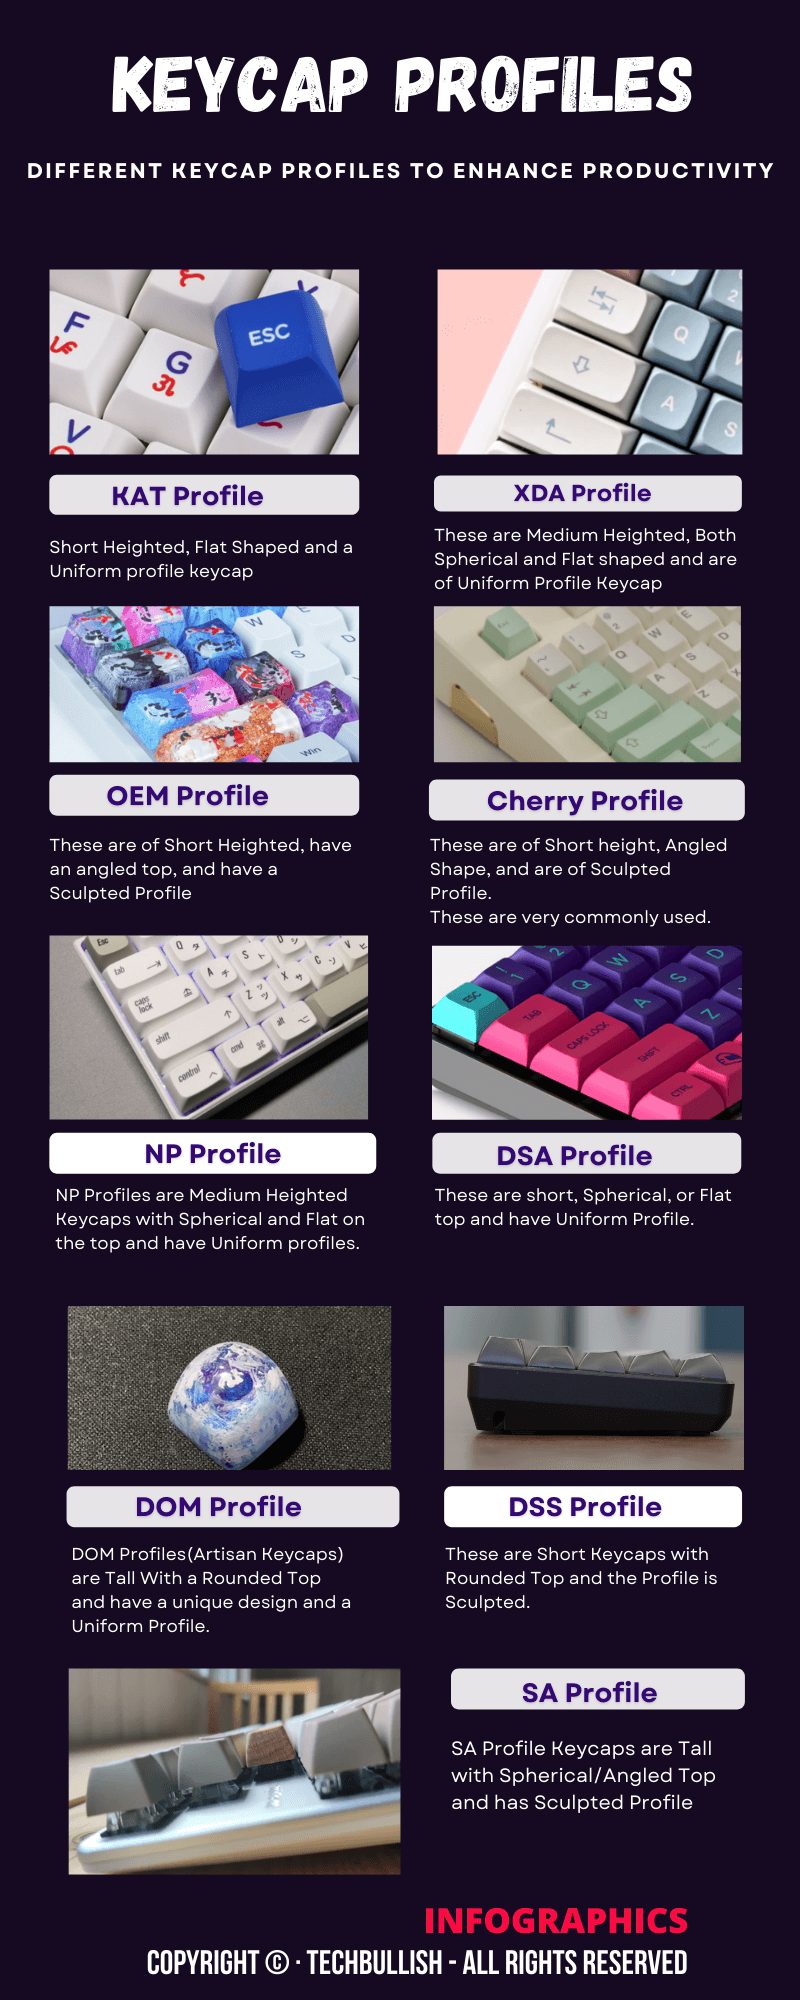 Infographics showing different keycap profiles